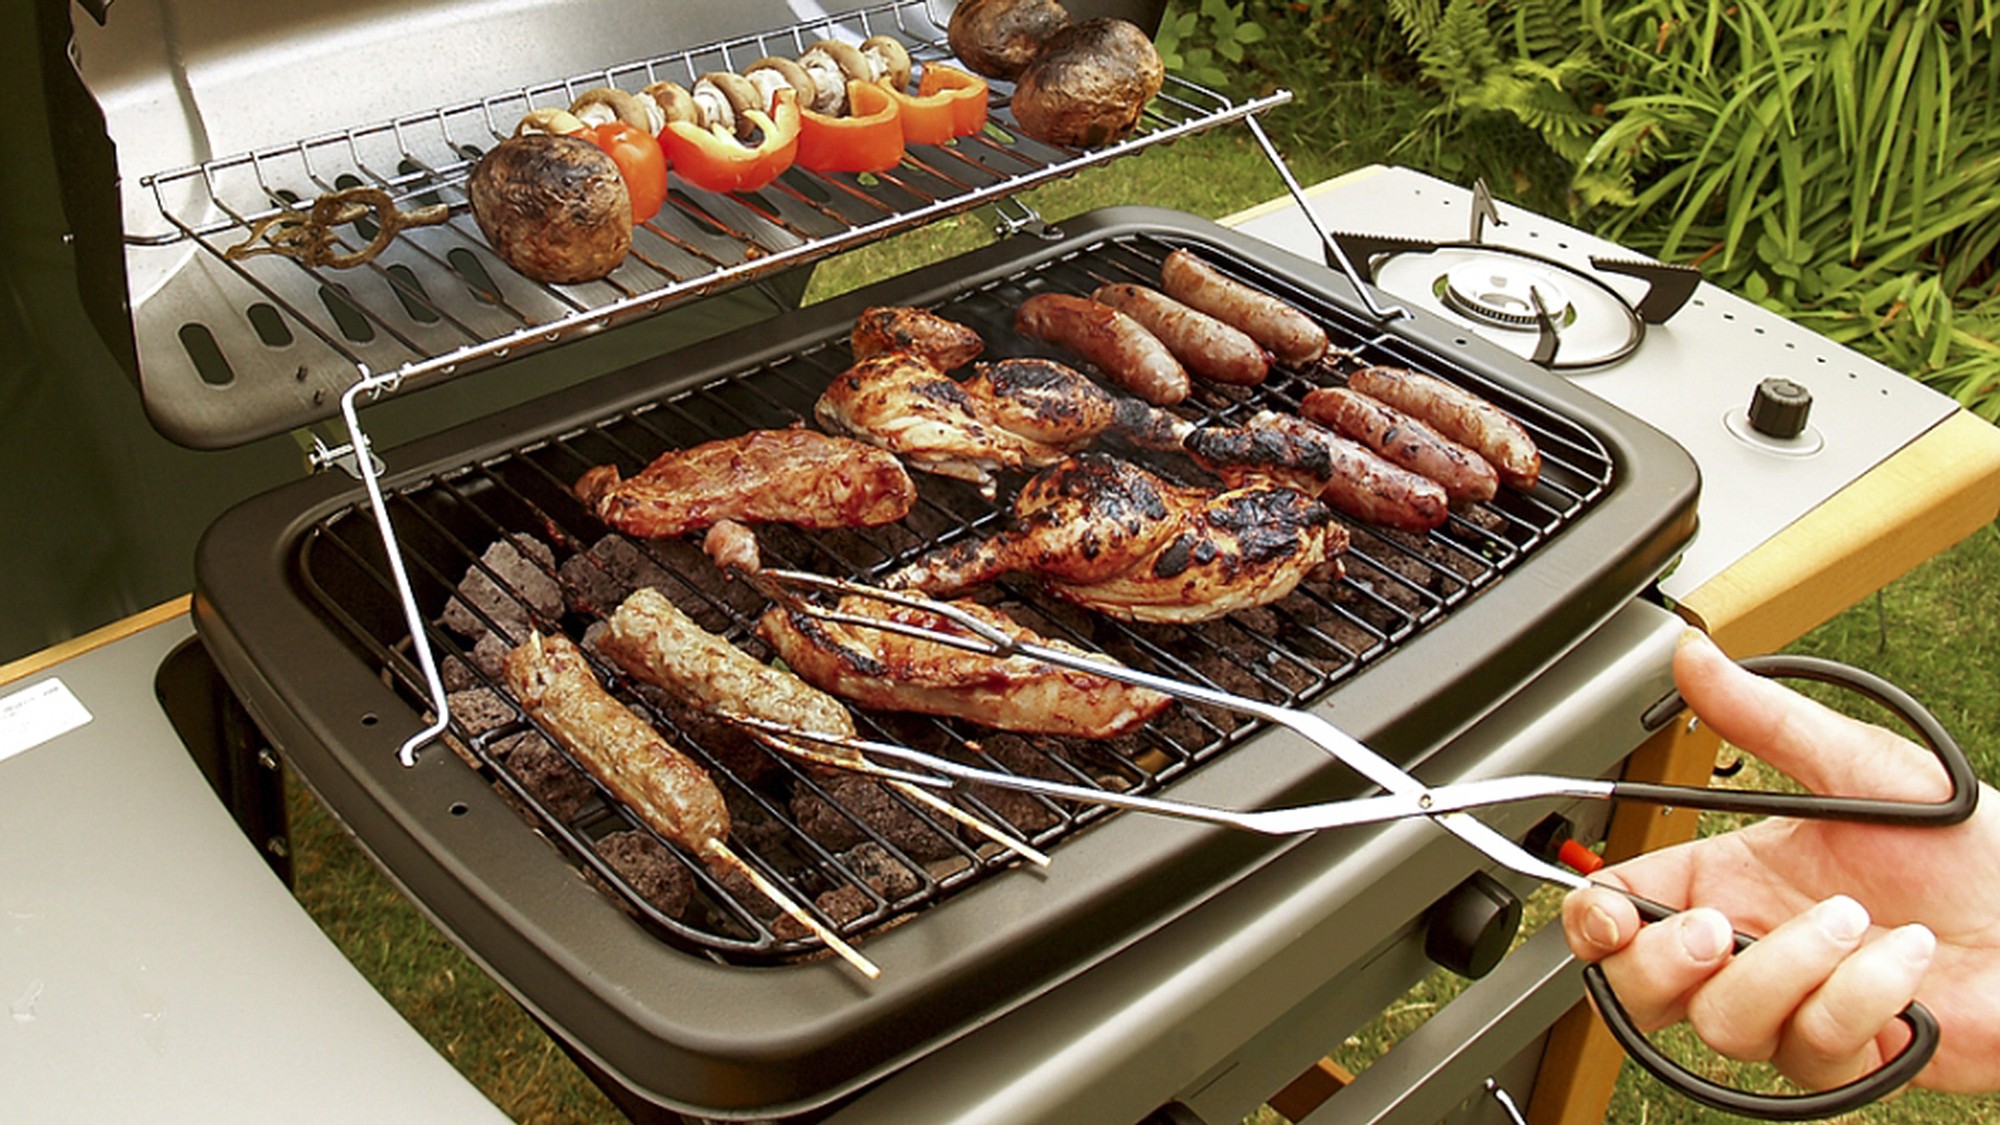 A gas grill allows variable heating options to cook several foods at once.